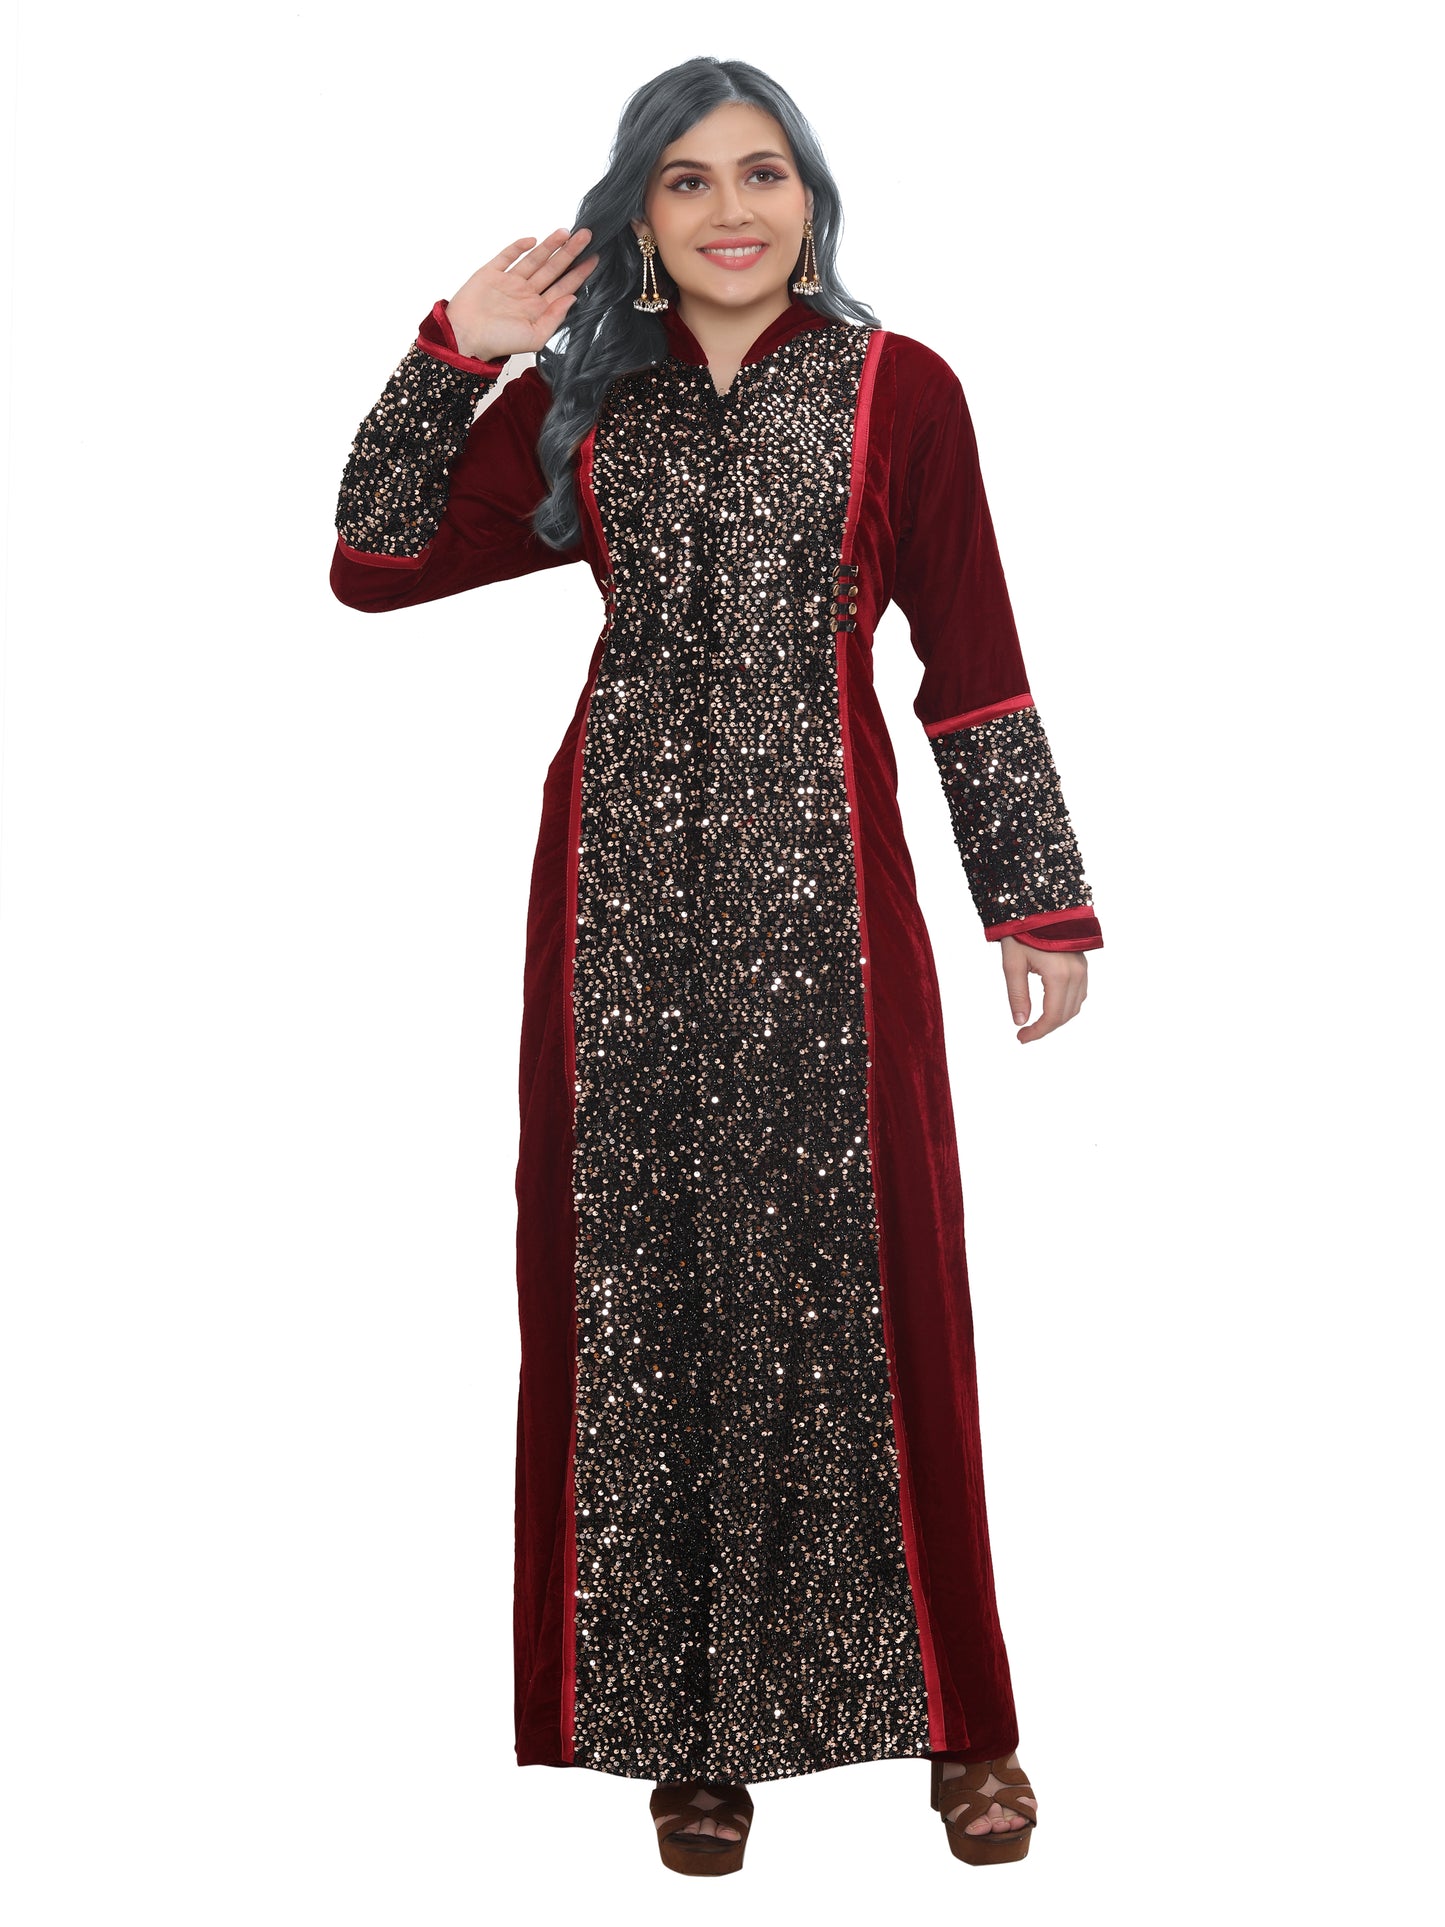 Game of Throne Queen Dress Maroon Gown | Costume - Maxim Creation